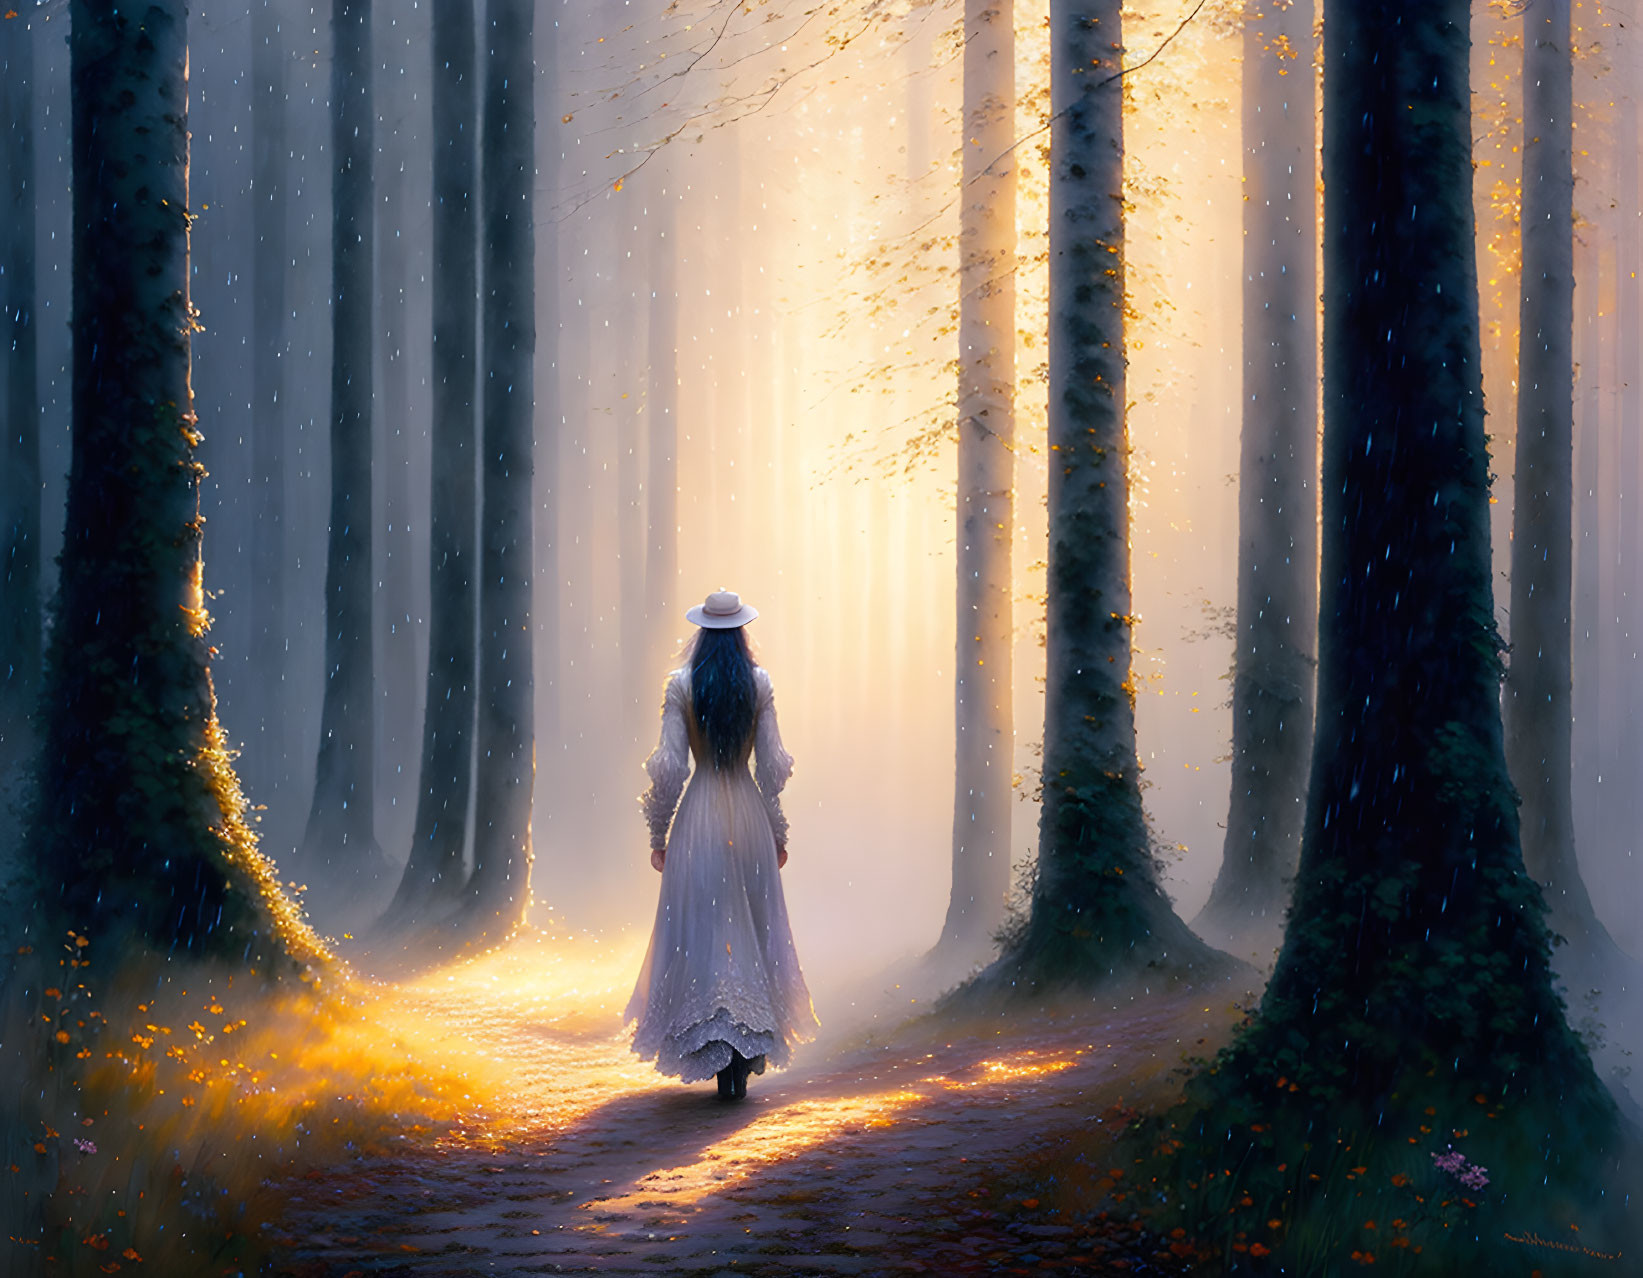 Person in white dress and hat strolls forest path with tall trees and dappled light